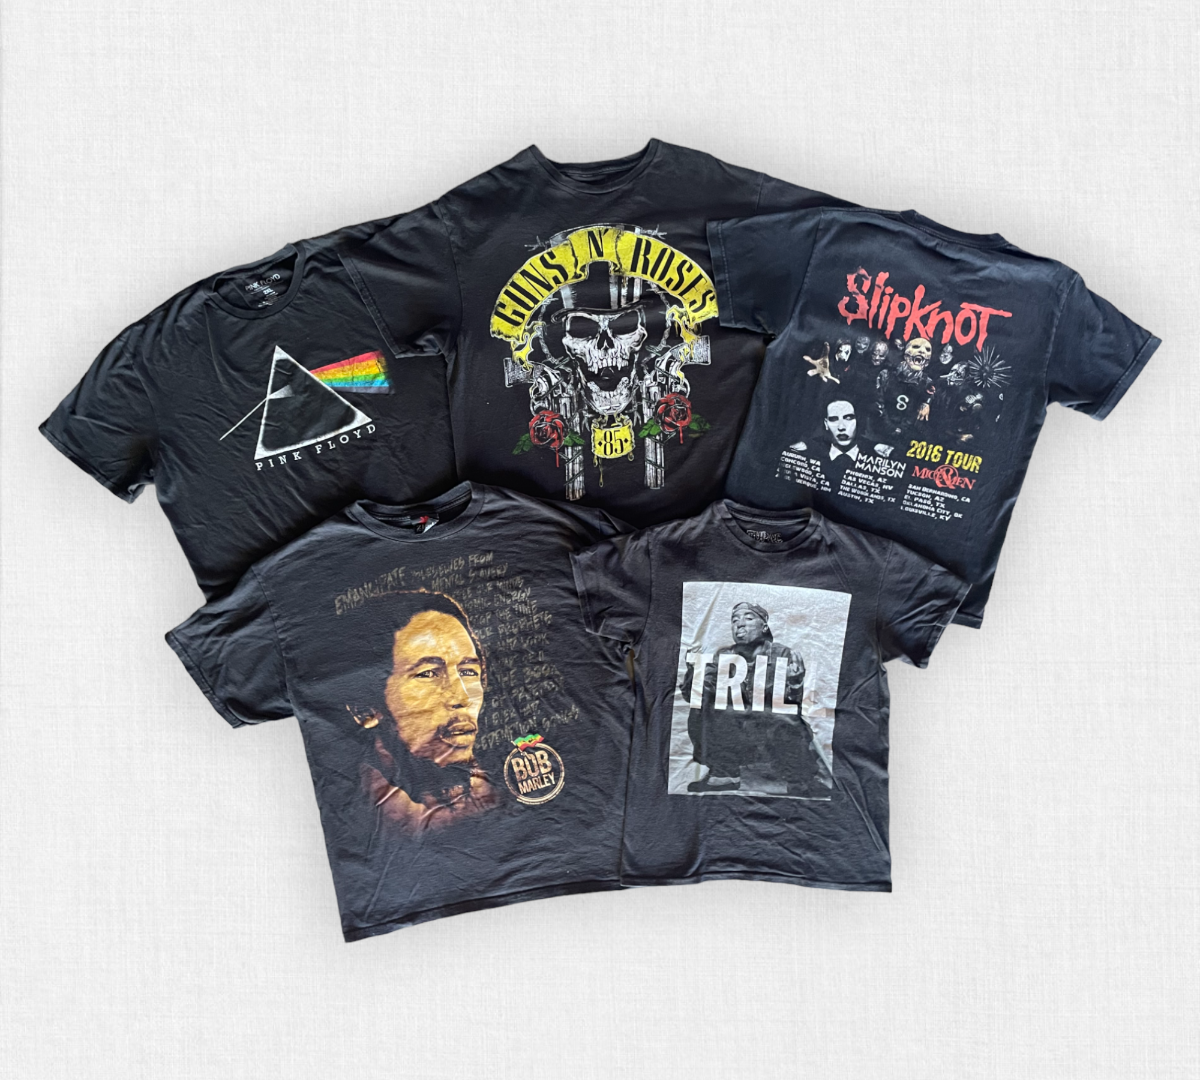 Buy vintage and second-hand rock band t-shirts ONE wholesale – ONEvintagewholesale